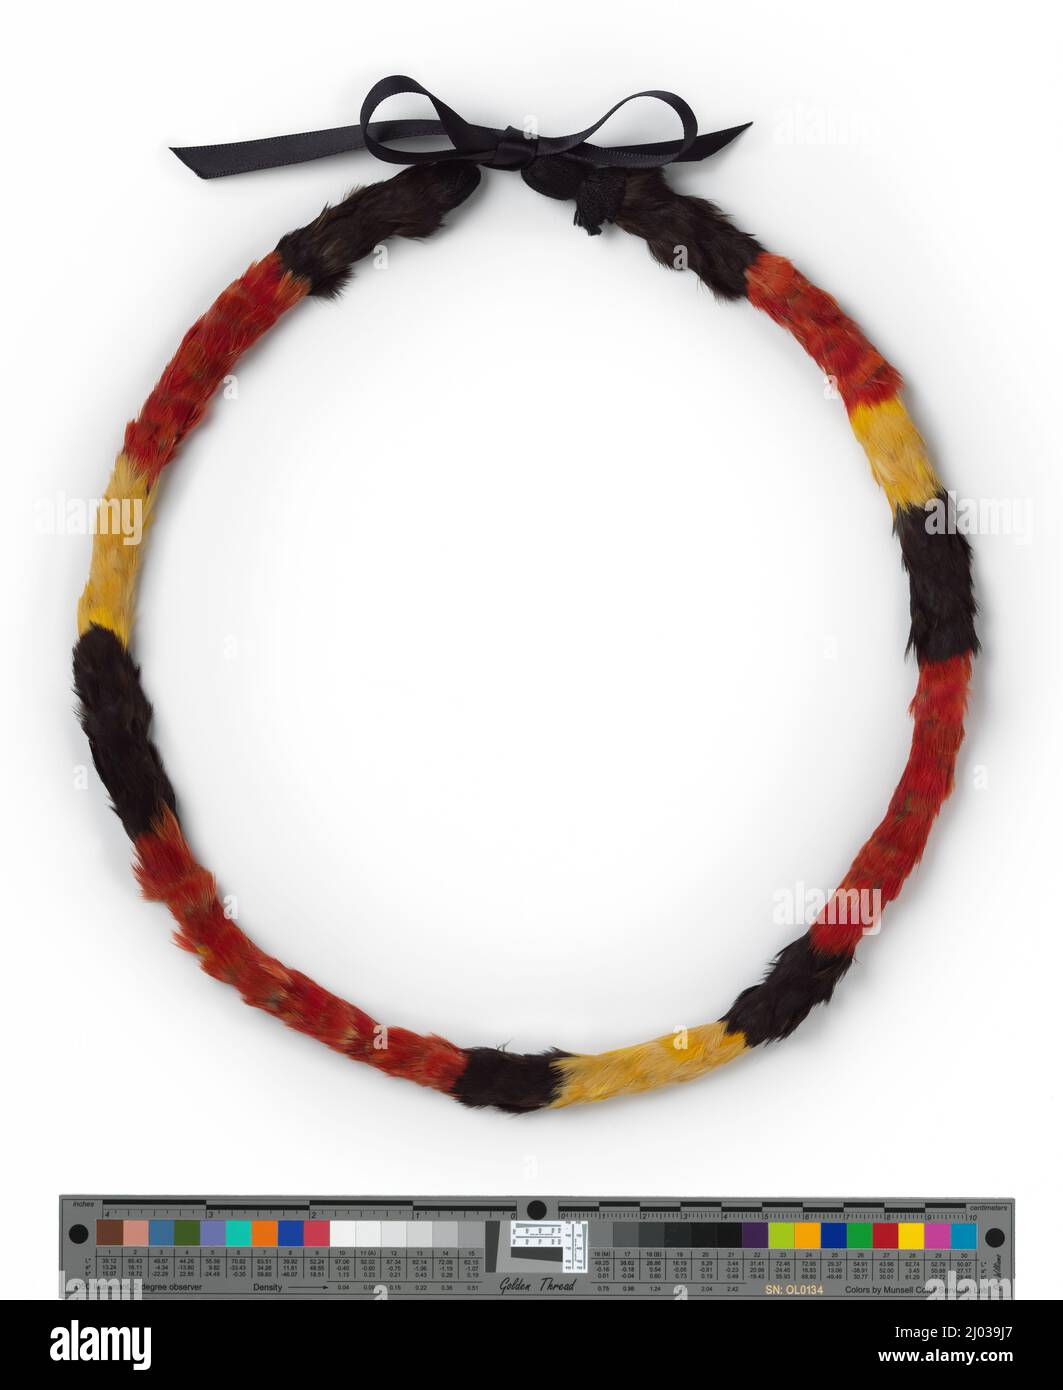 Feather lei (Lei hulu). Hawaii, 19th century. Jewelry and Adornments; necklaces. Black and yellow ʻōʻō (Moho sp.) feathers, red 'i'iwi (Vestiaria coccinea) feathers, olonā (Touchardia latifolia) fiber and black ribbon Stock Photo